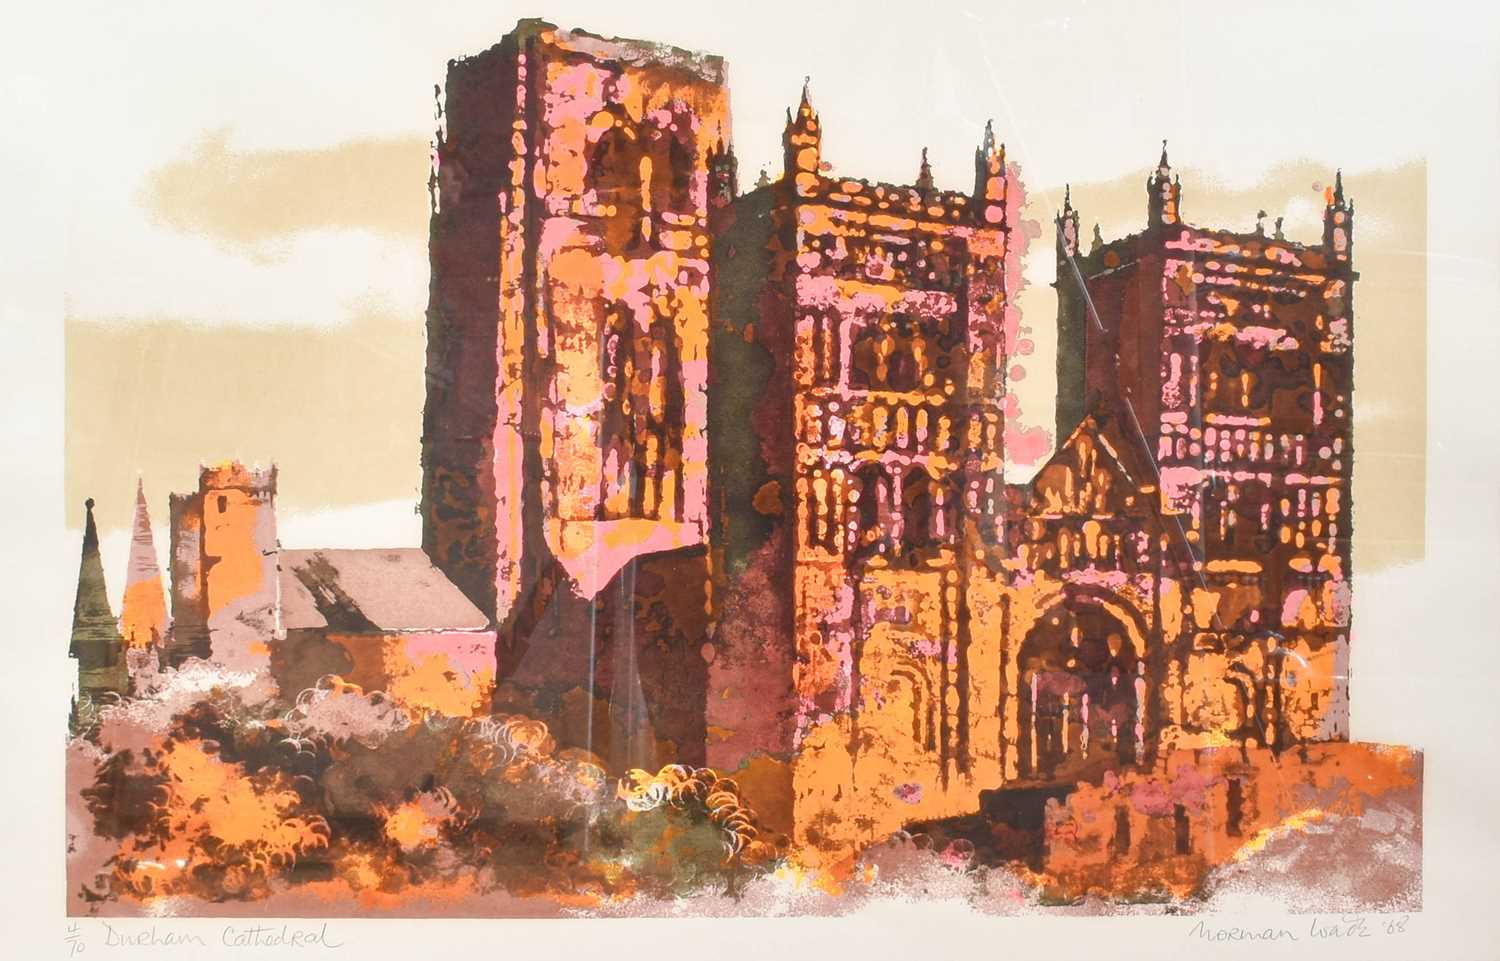 Norman Wade (20th Century) "Durham Cathedral" Signed and dated (19)68, inscribed and numbered 4/